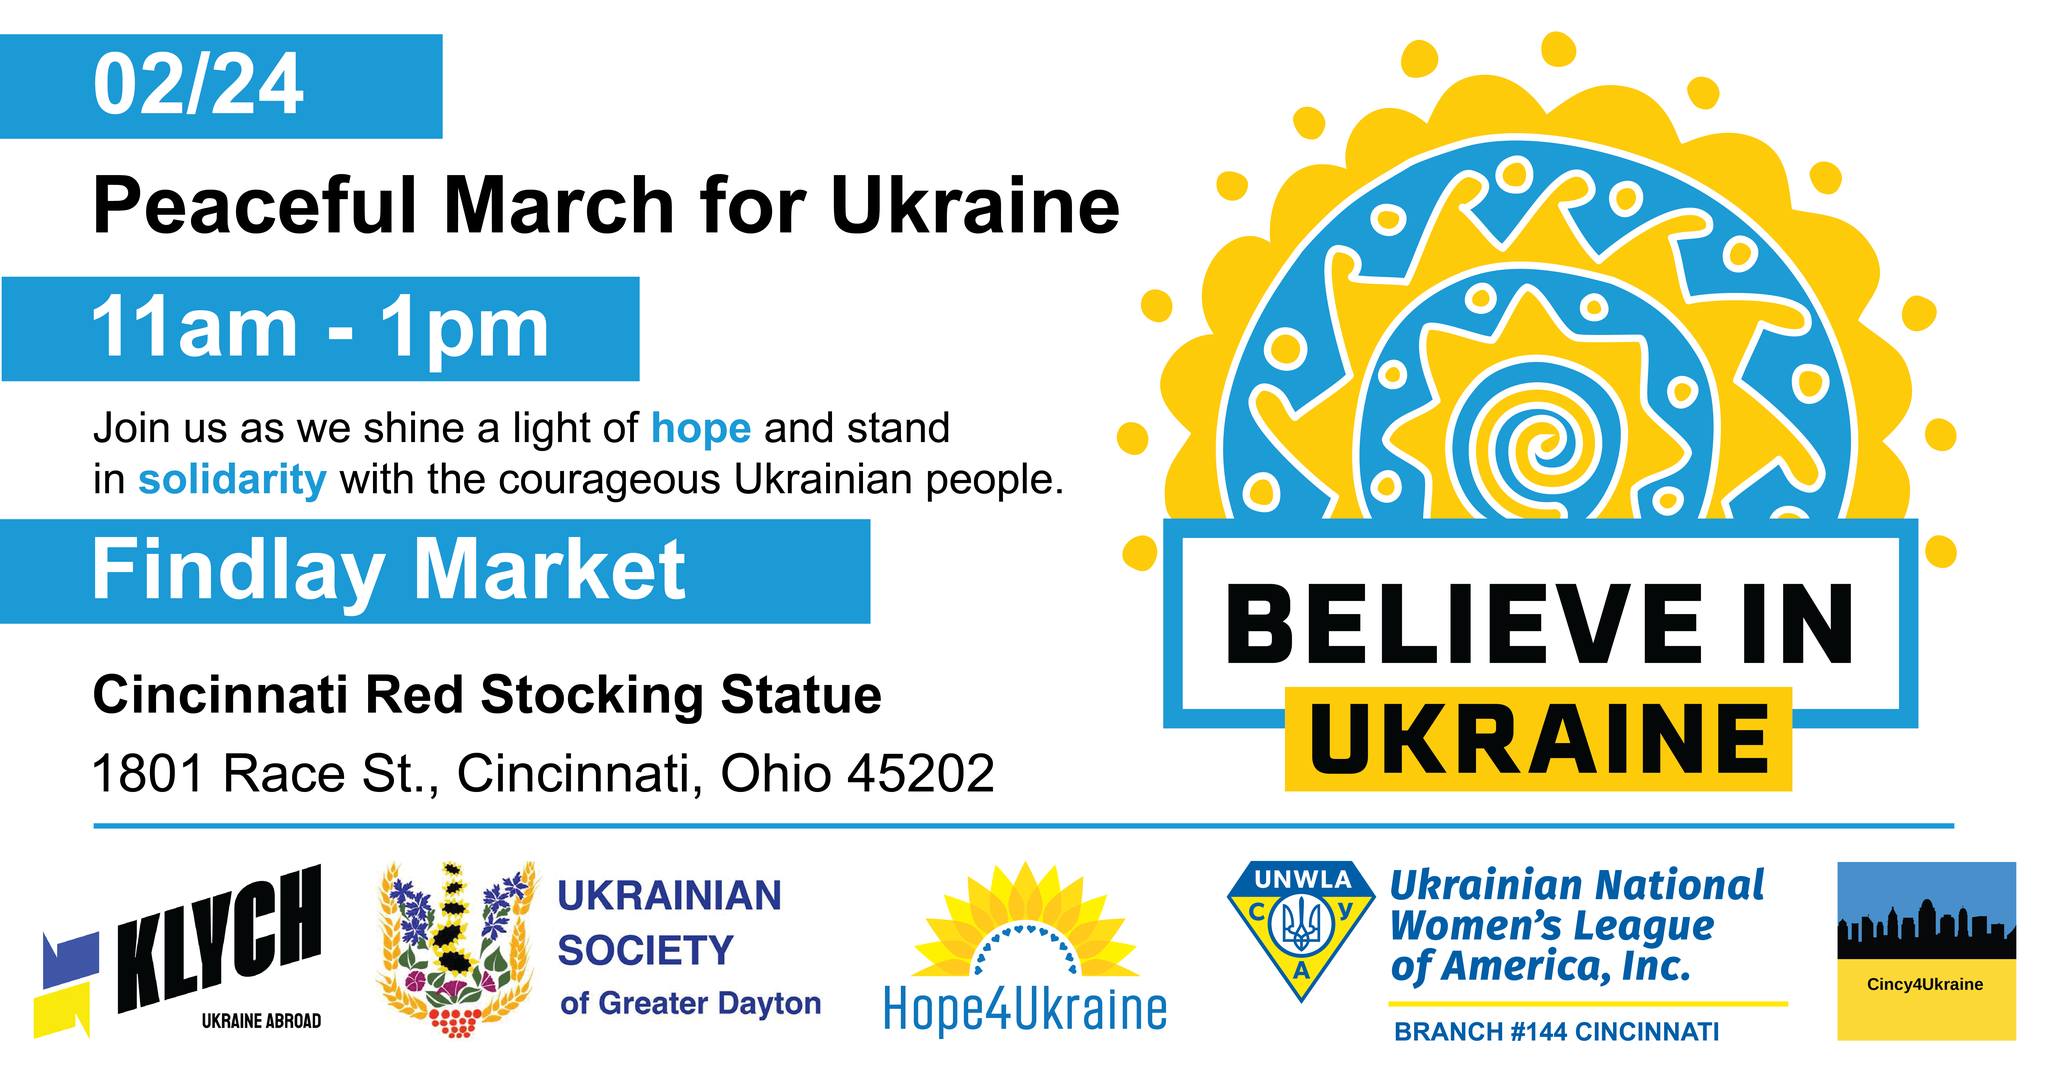 Peaceful March for Ukraine - Feb 24 - OH